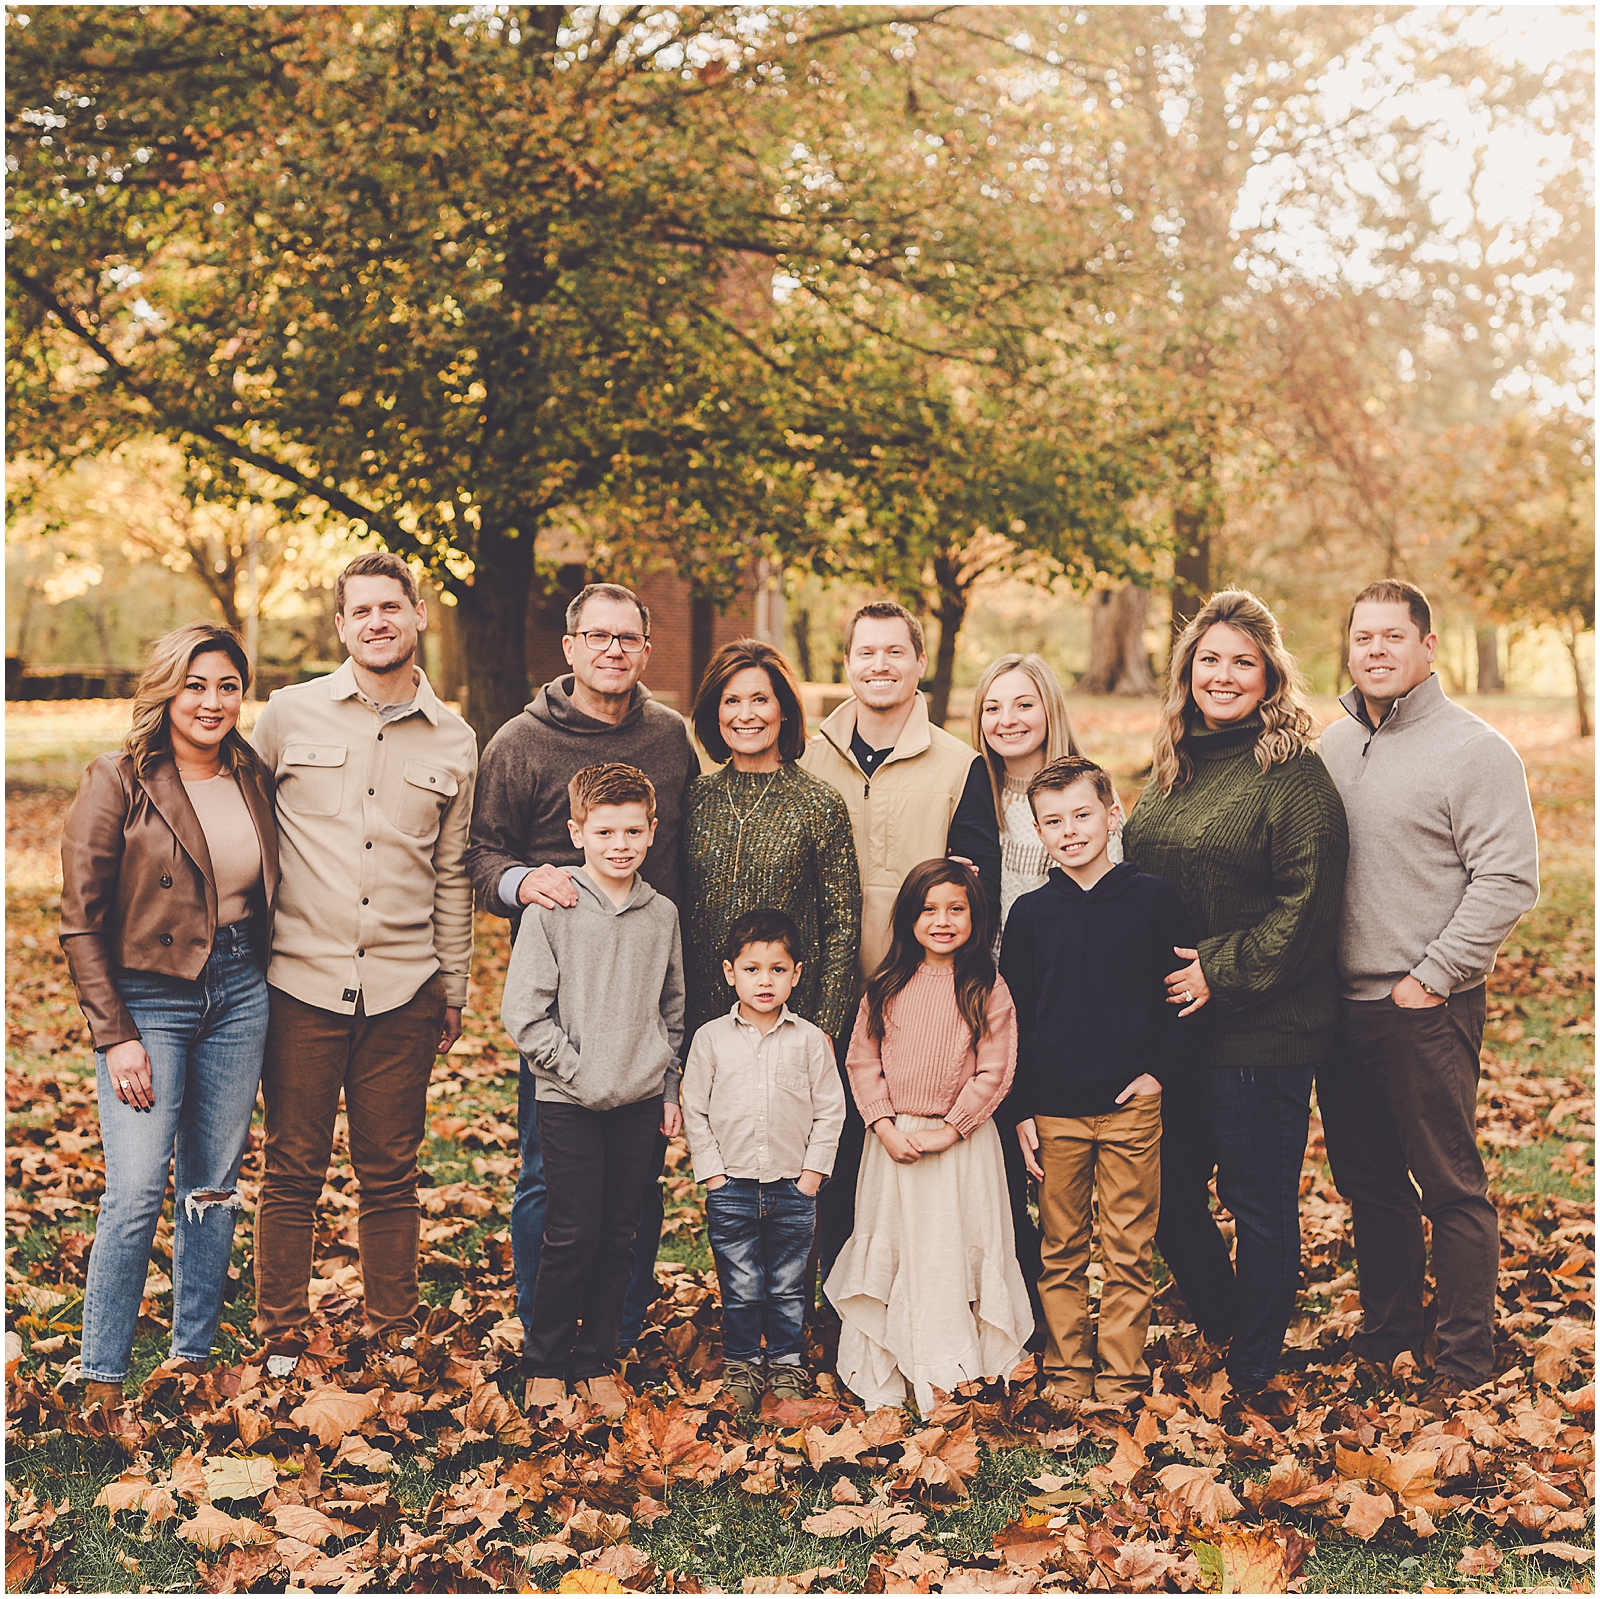 Kara Evans Photographer's top blog posts of 2023 with the Knapp family fall Iroquois County family photos in Watseka, Illinois.